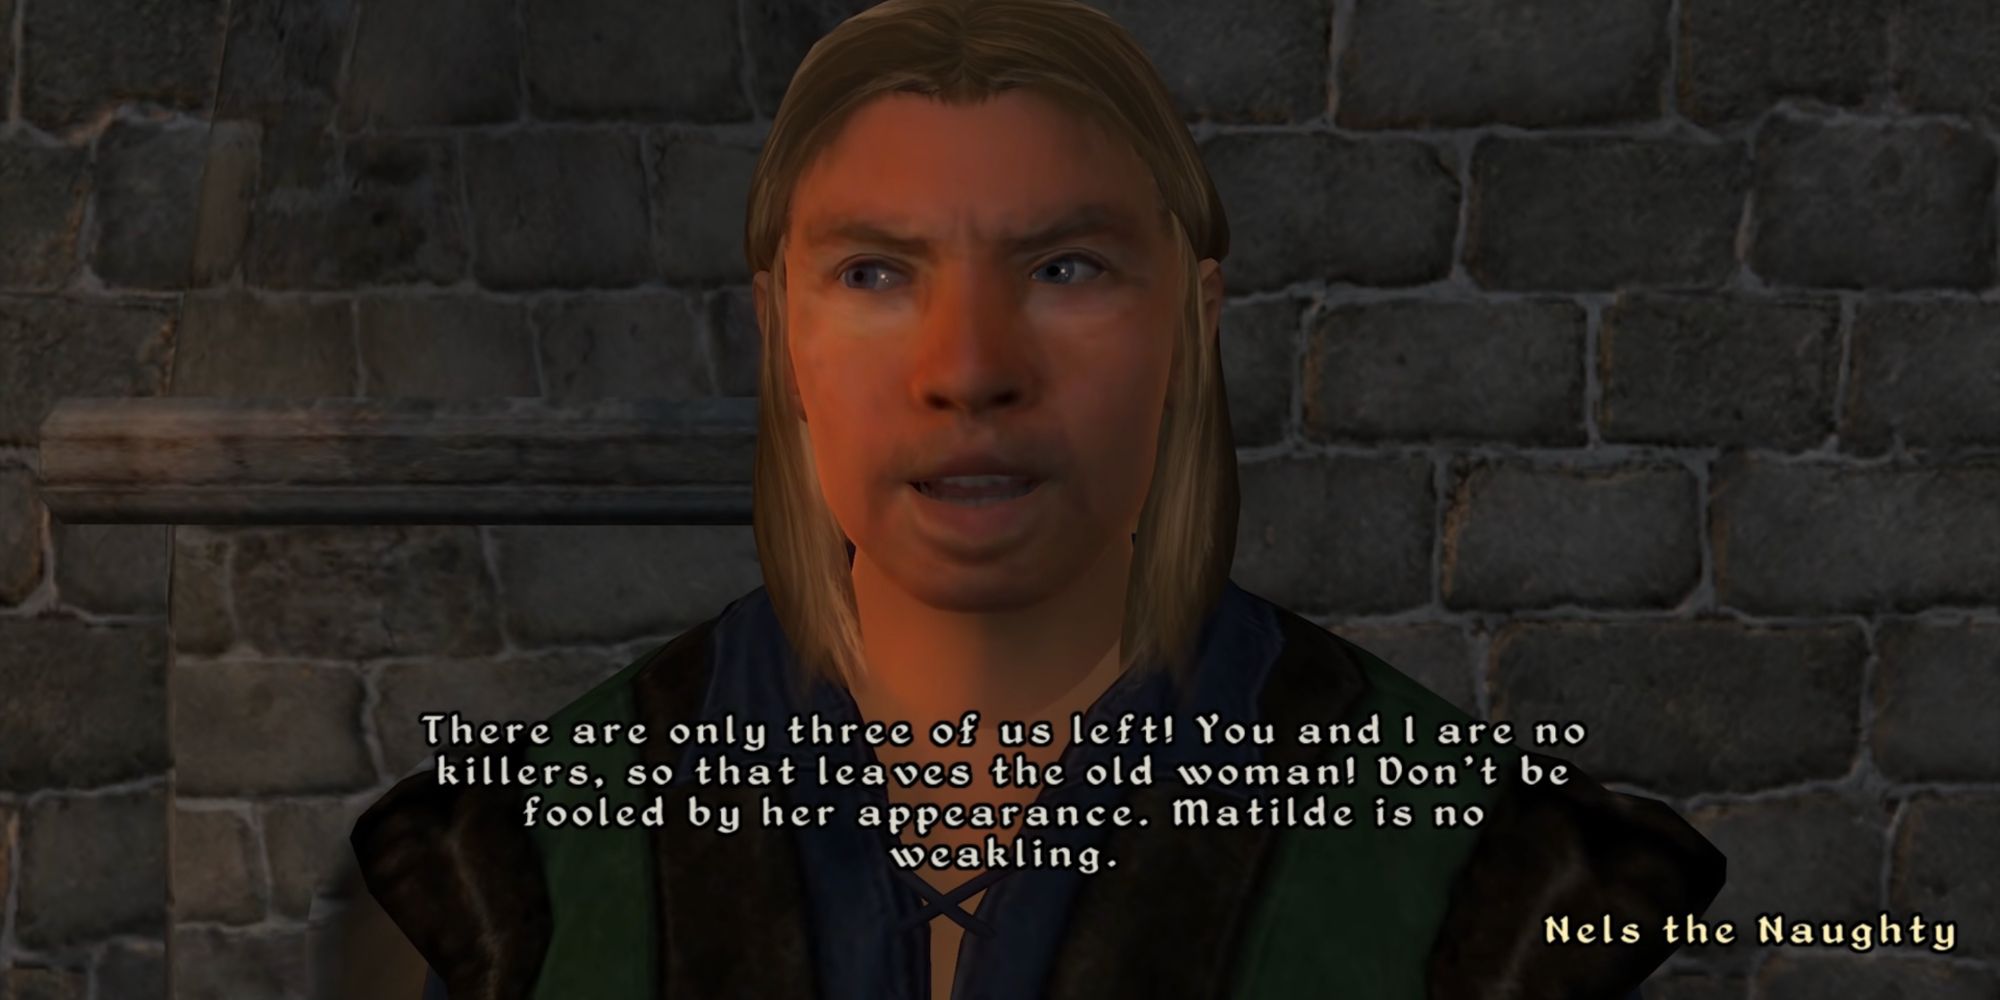 A screenshot of Oblivion, showing Ned The Naughty tell the player character not to trust the old woman Matilde